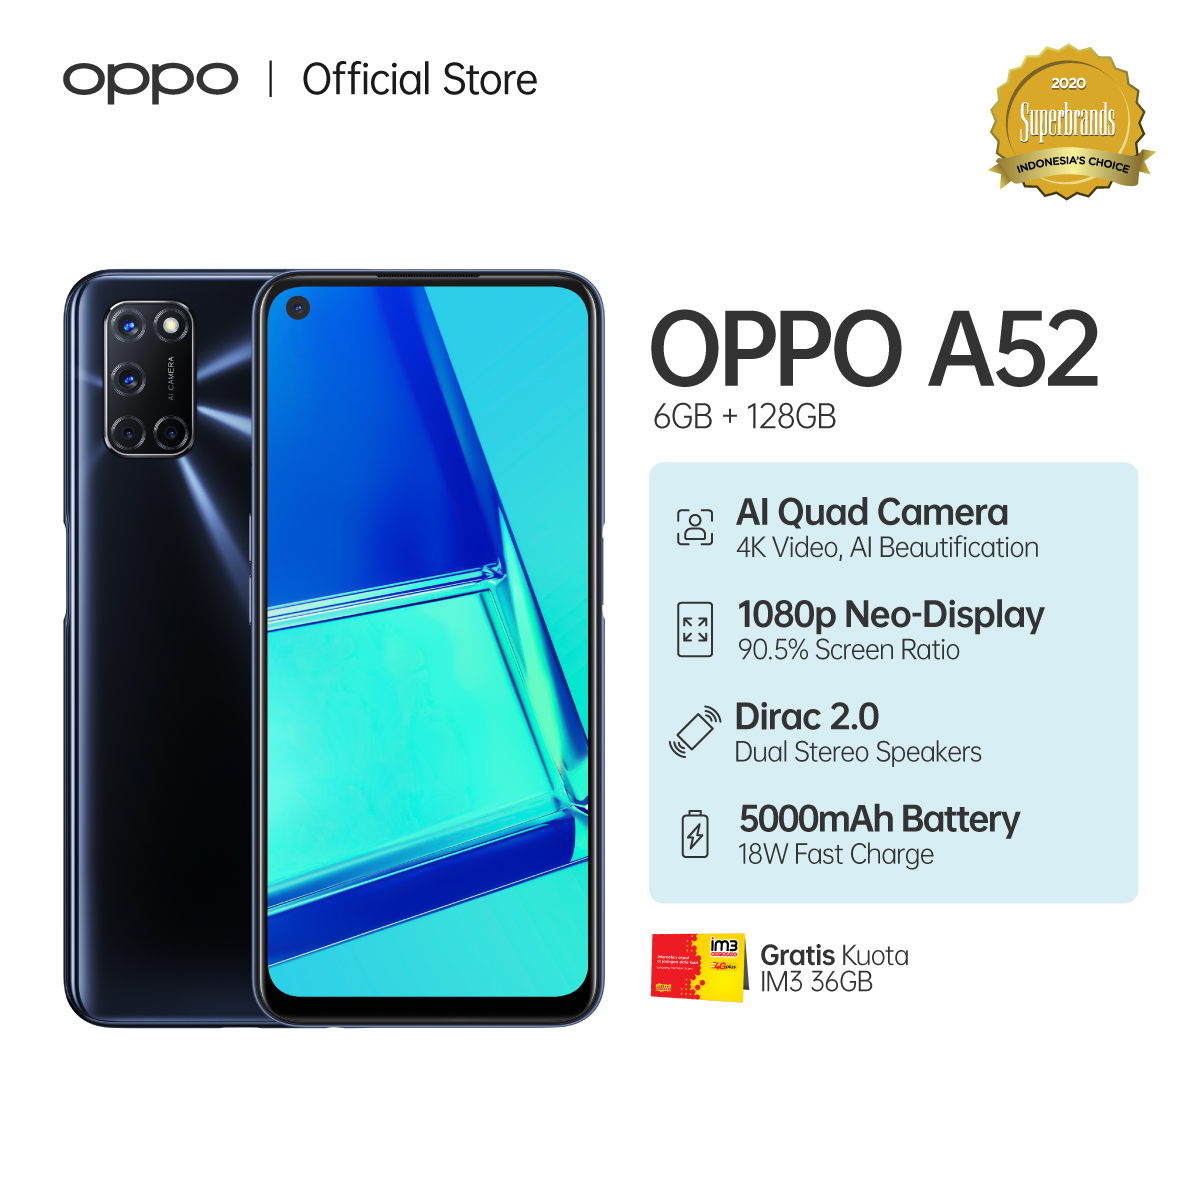 Jual OPPO A52 Smartphone Special Online Edition [128GB/ 6GB] di Seller